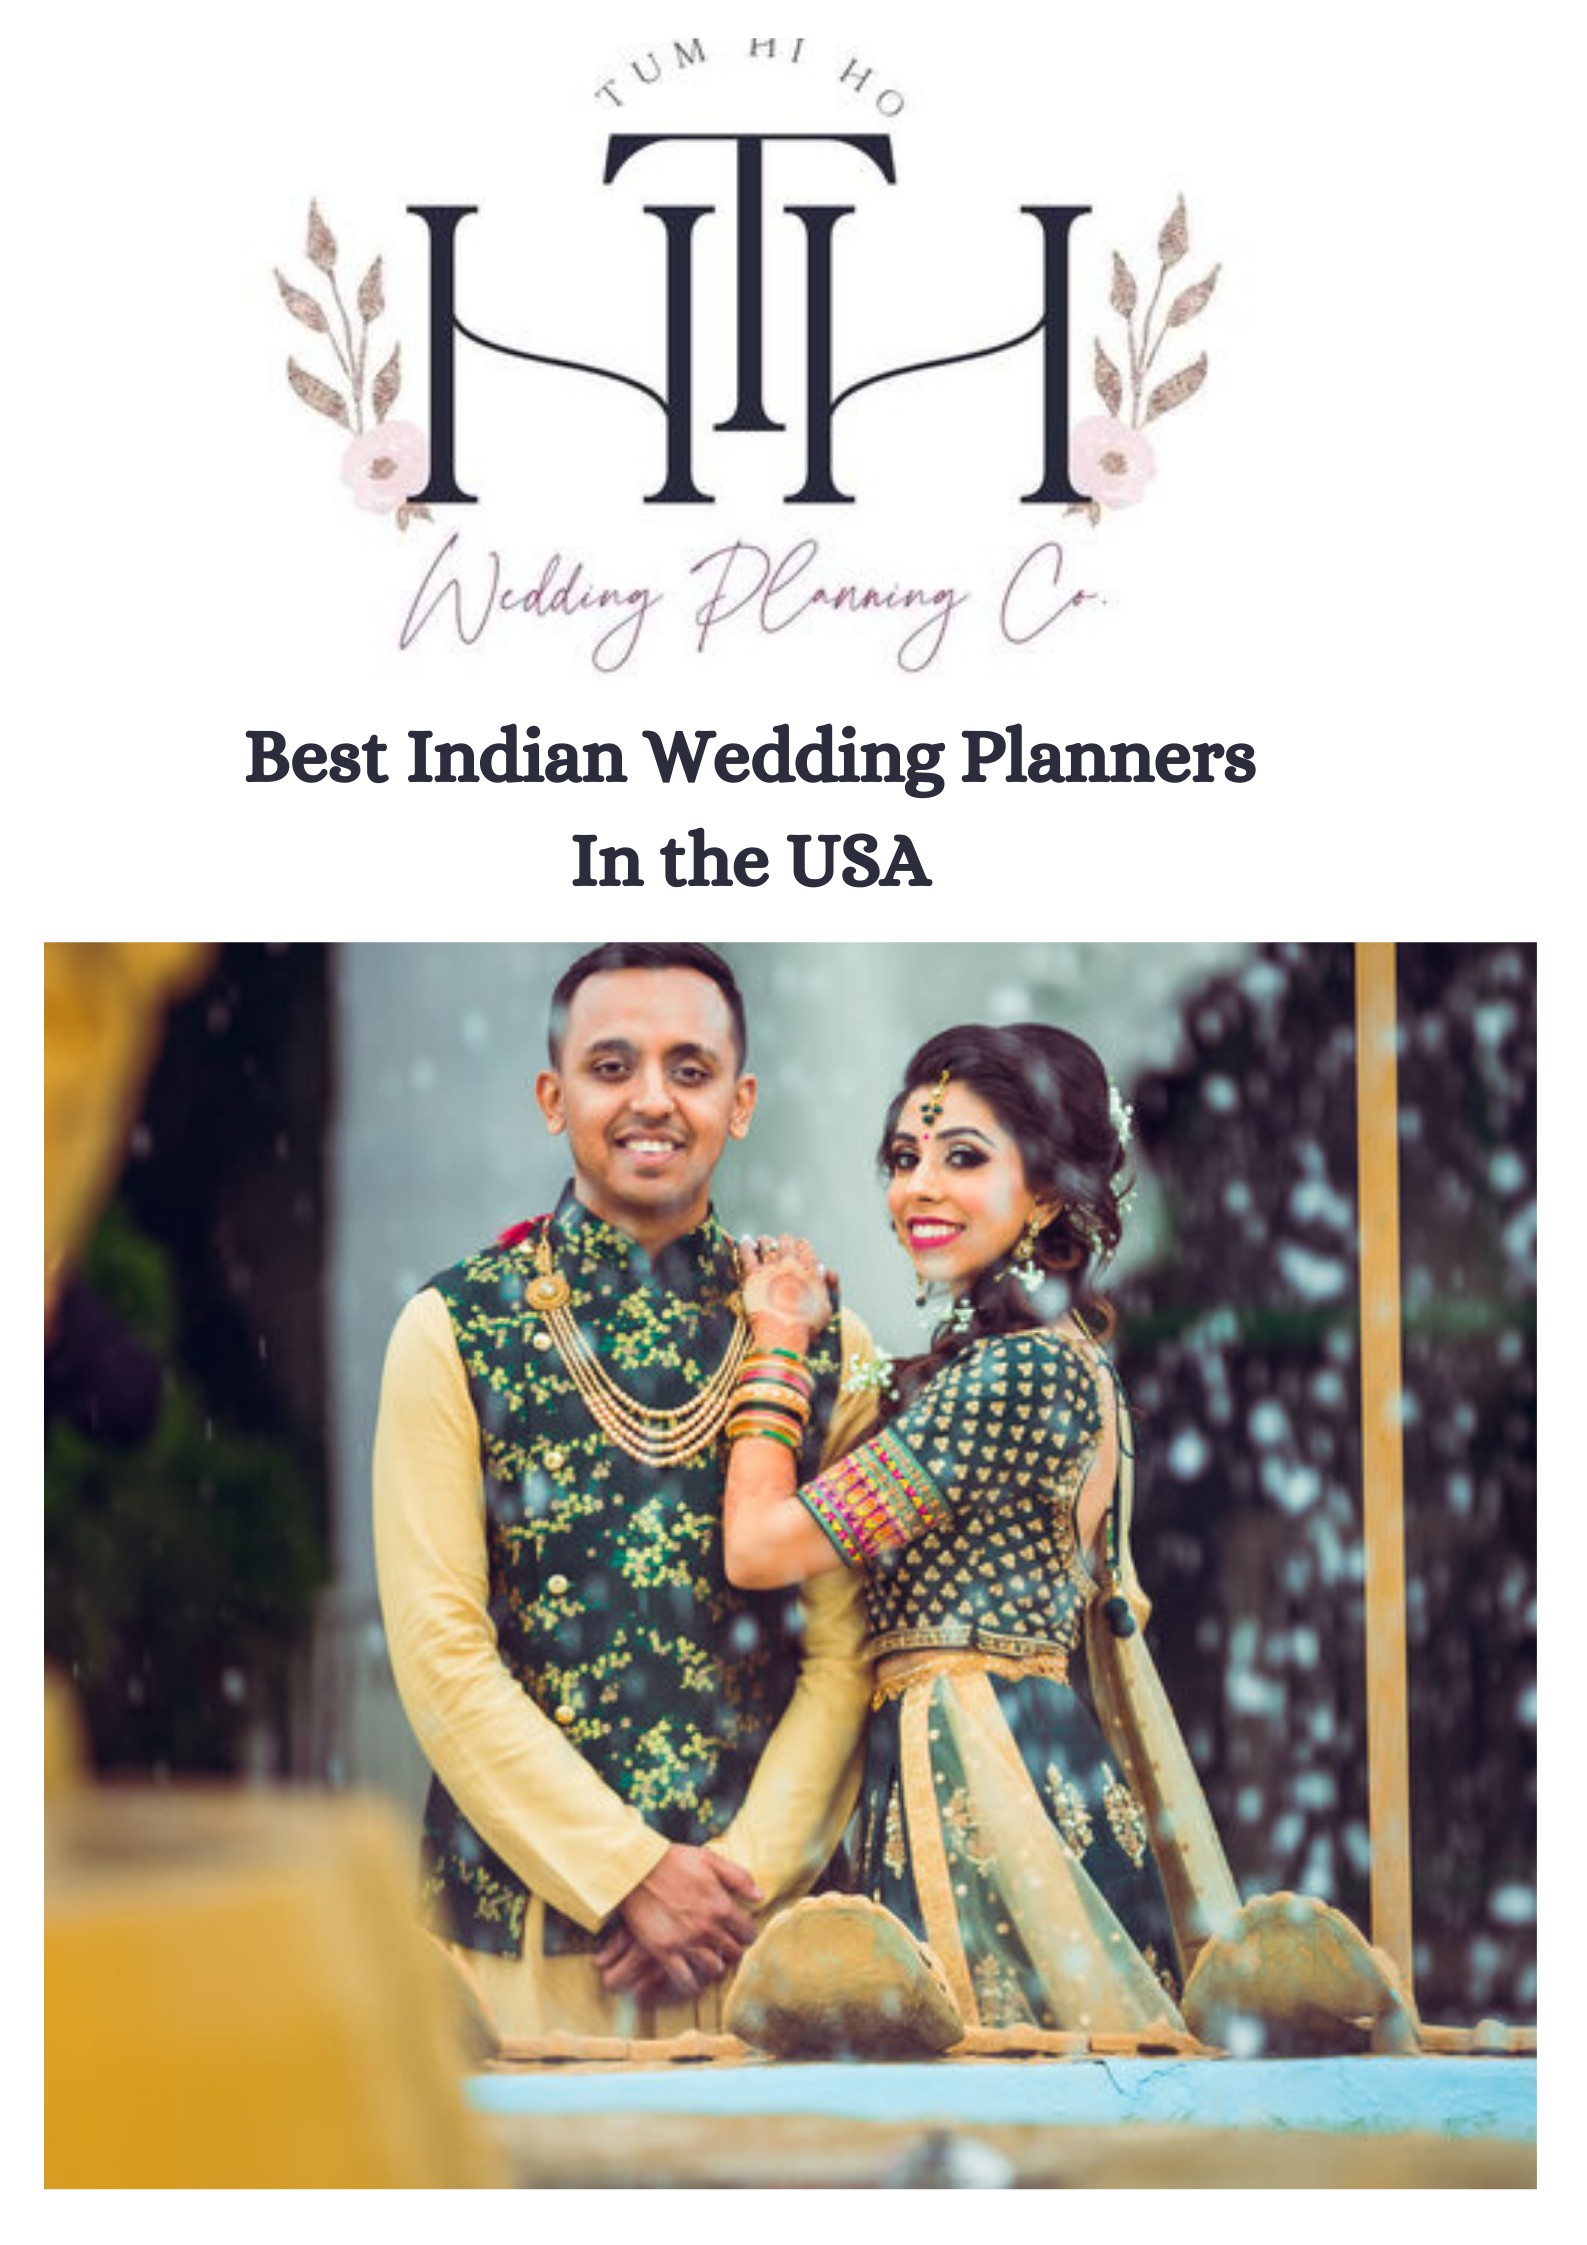 Know About Best Indian Wedding Planners In the USA